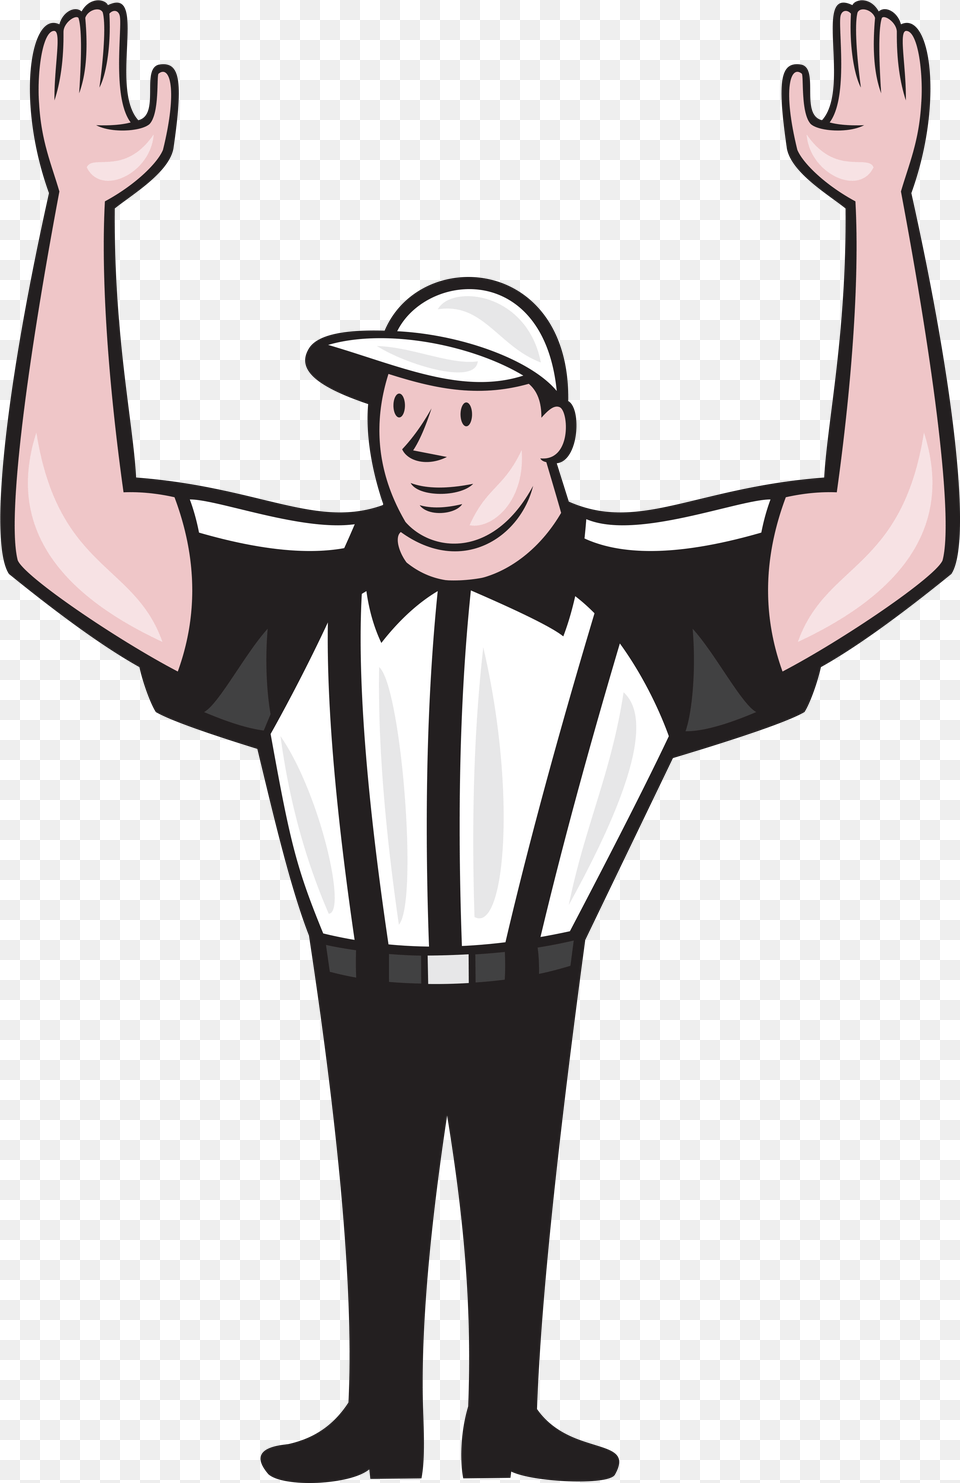 Football Referee 7 Image Cartoon Referee, Adult, Female, Person, Woman Free Transparent Png